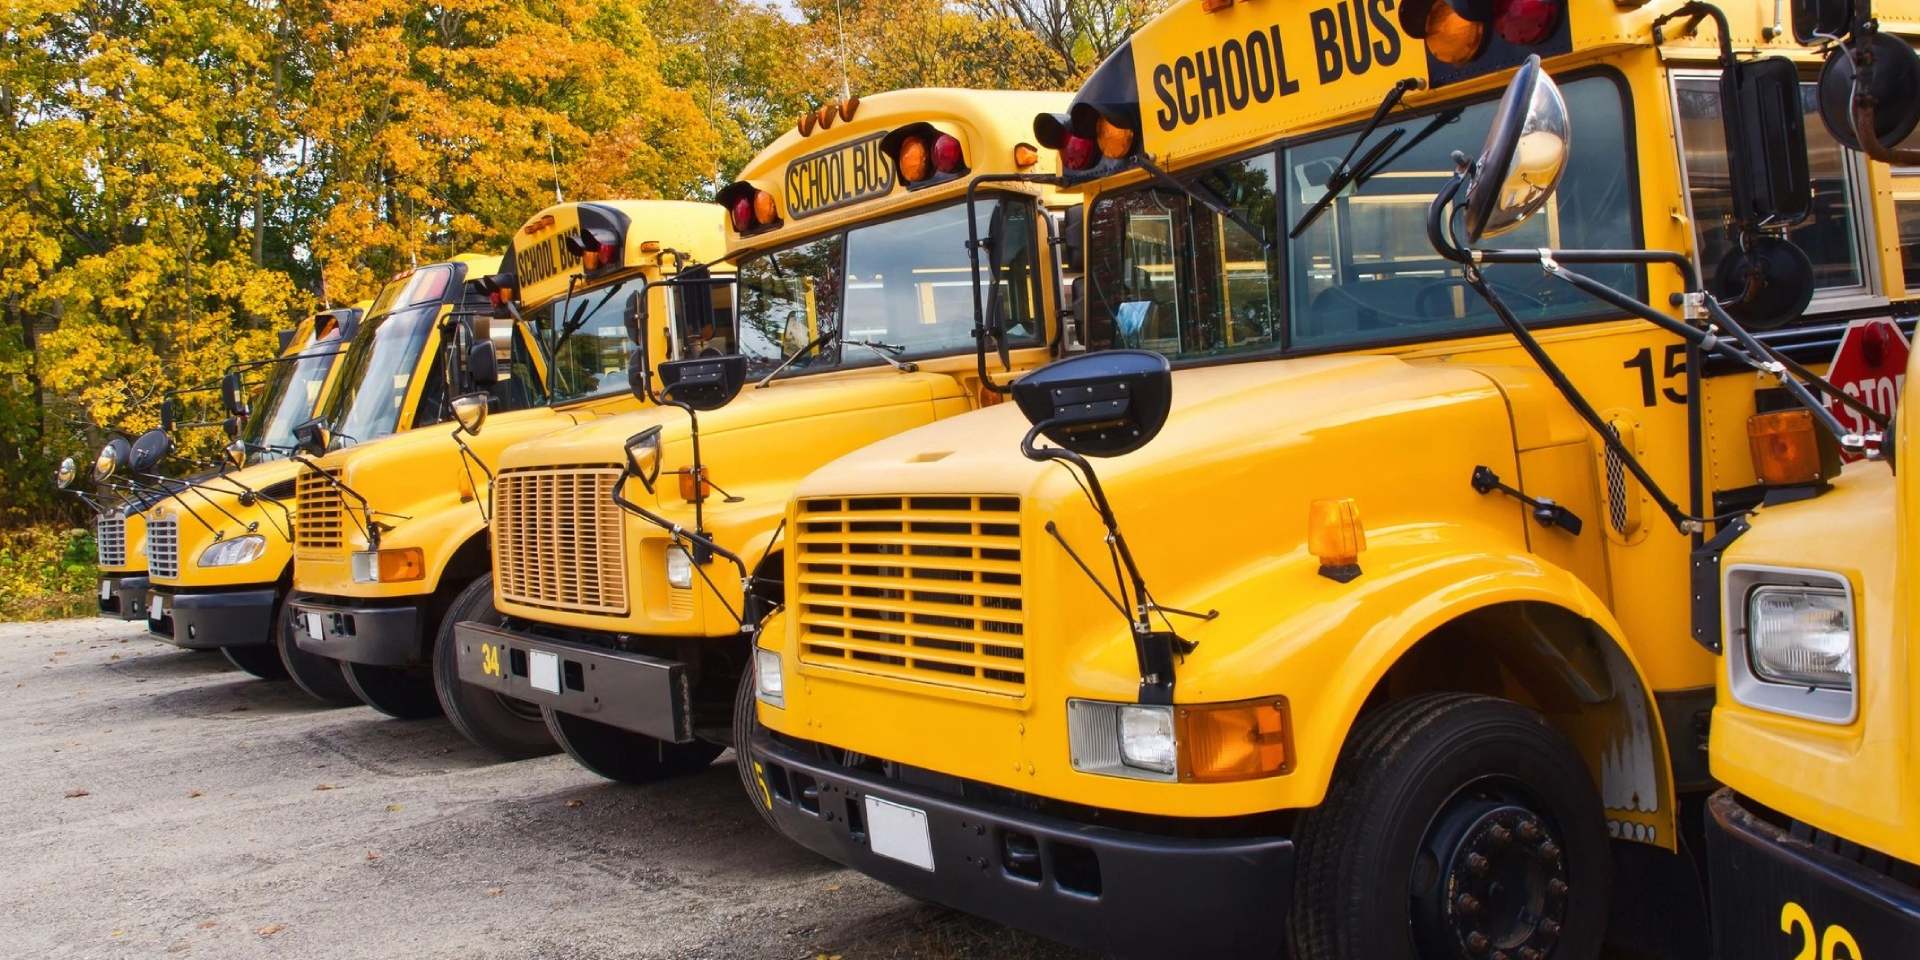 A row of school buses parked in the parking lot.